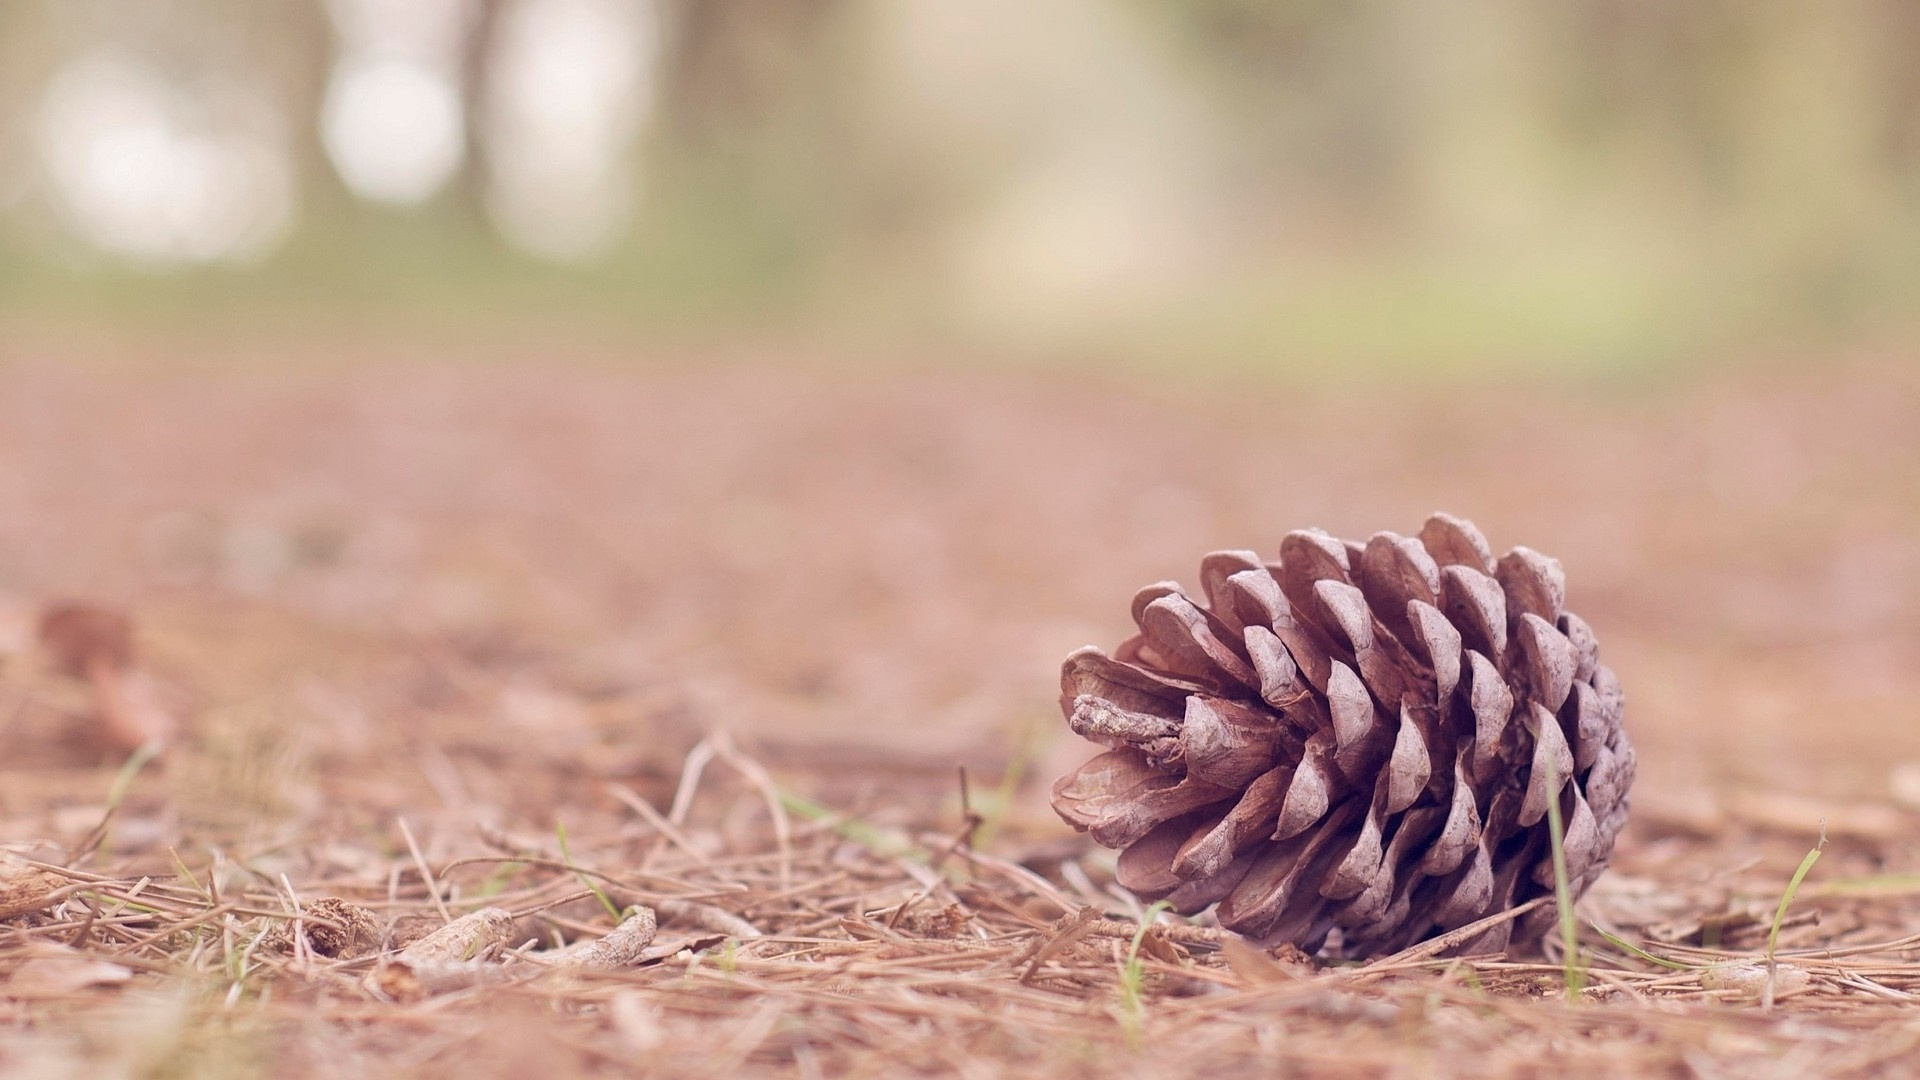 1920x1080 26 Pine Cone Wallpapers Wallpaperboat